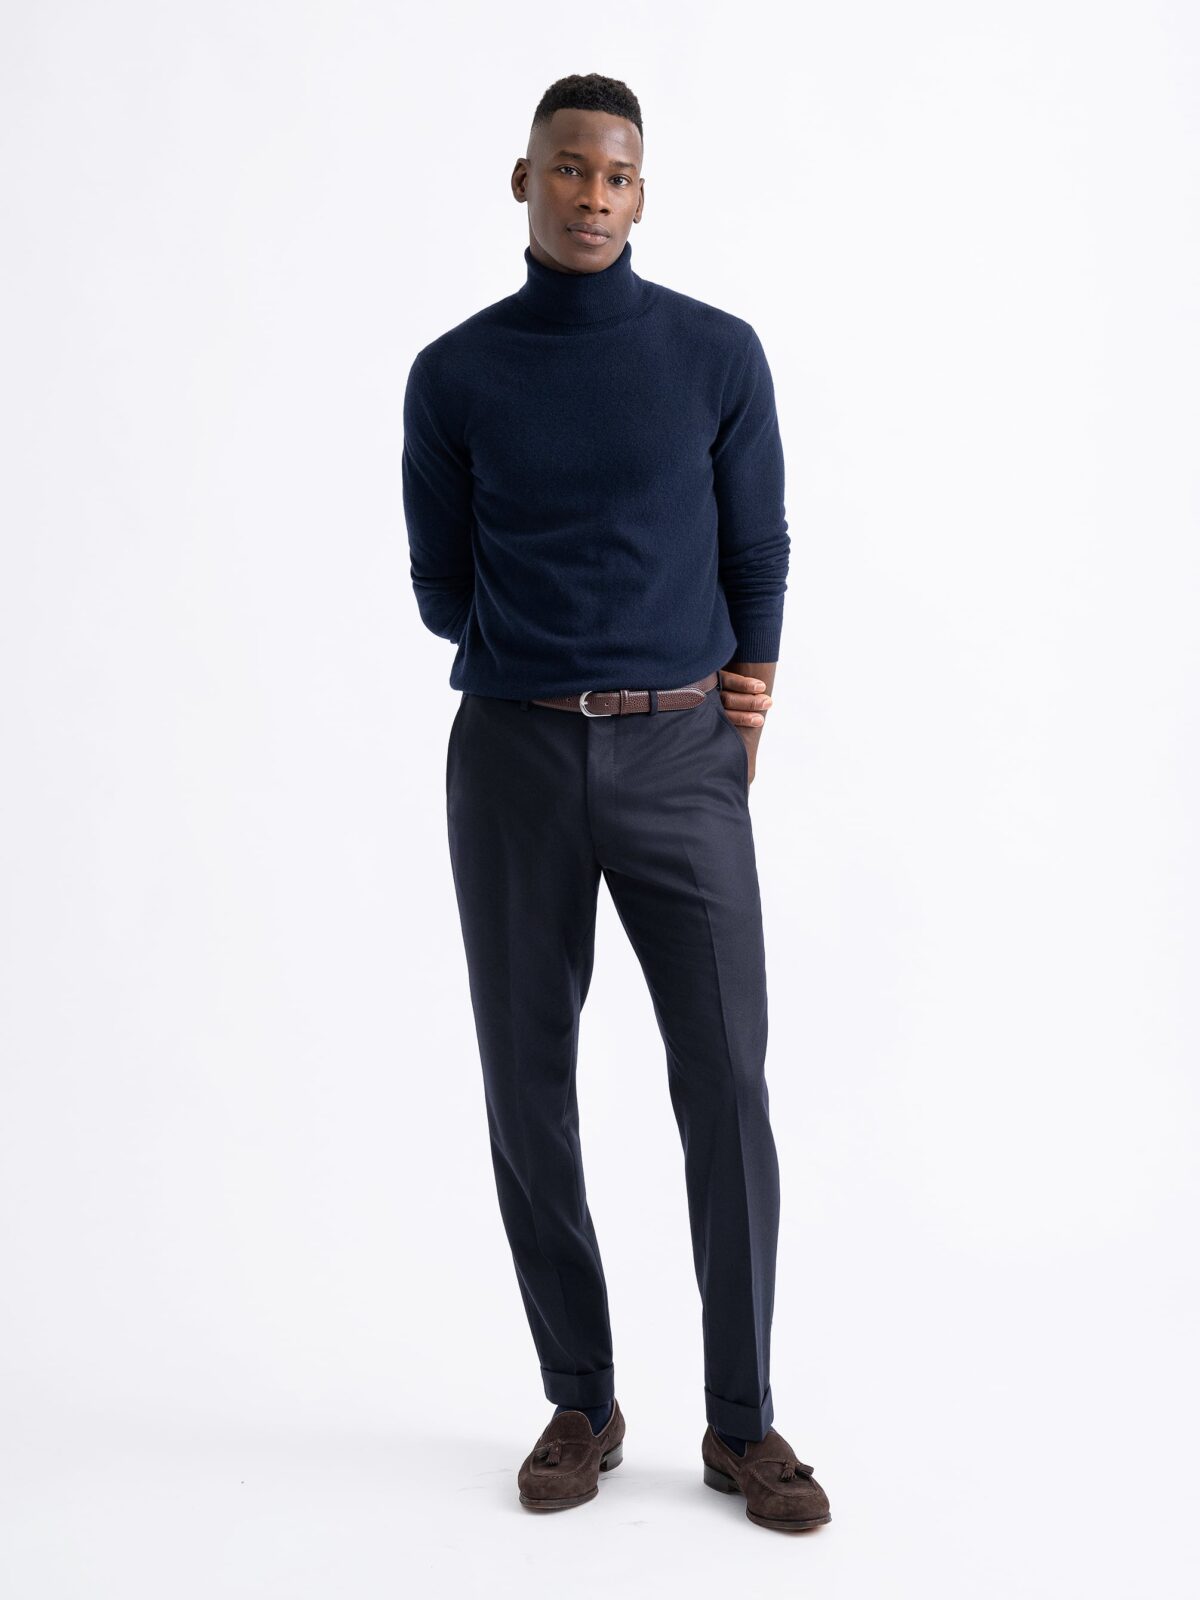 Navy Cashmere Turtleneck Sweater by Proper Cloth